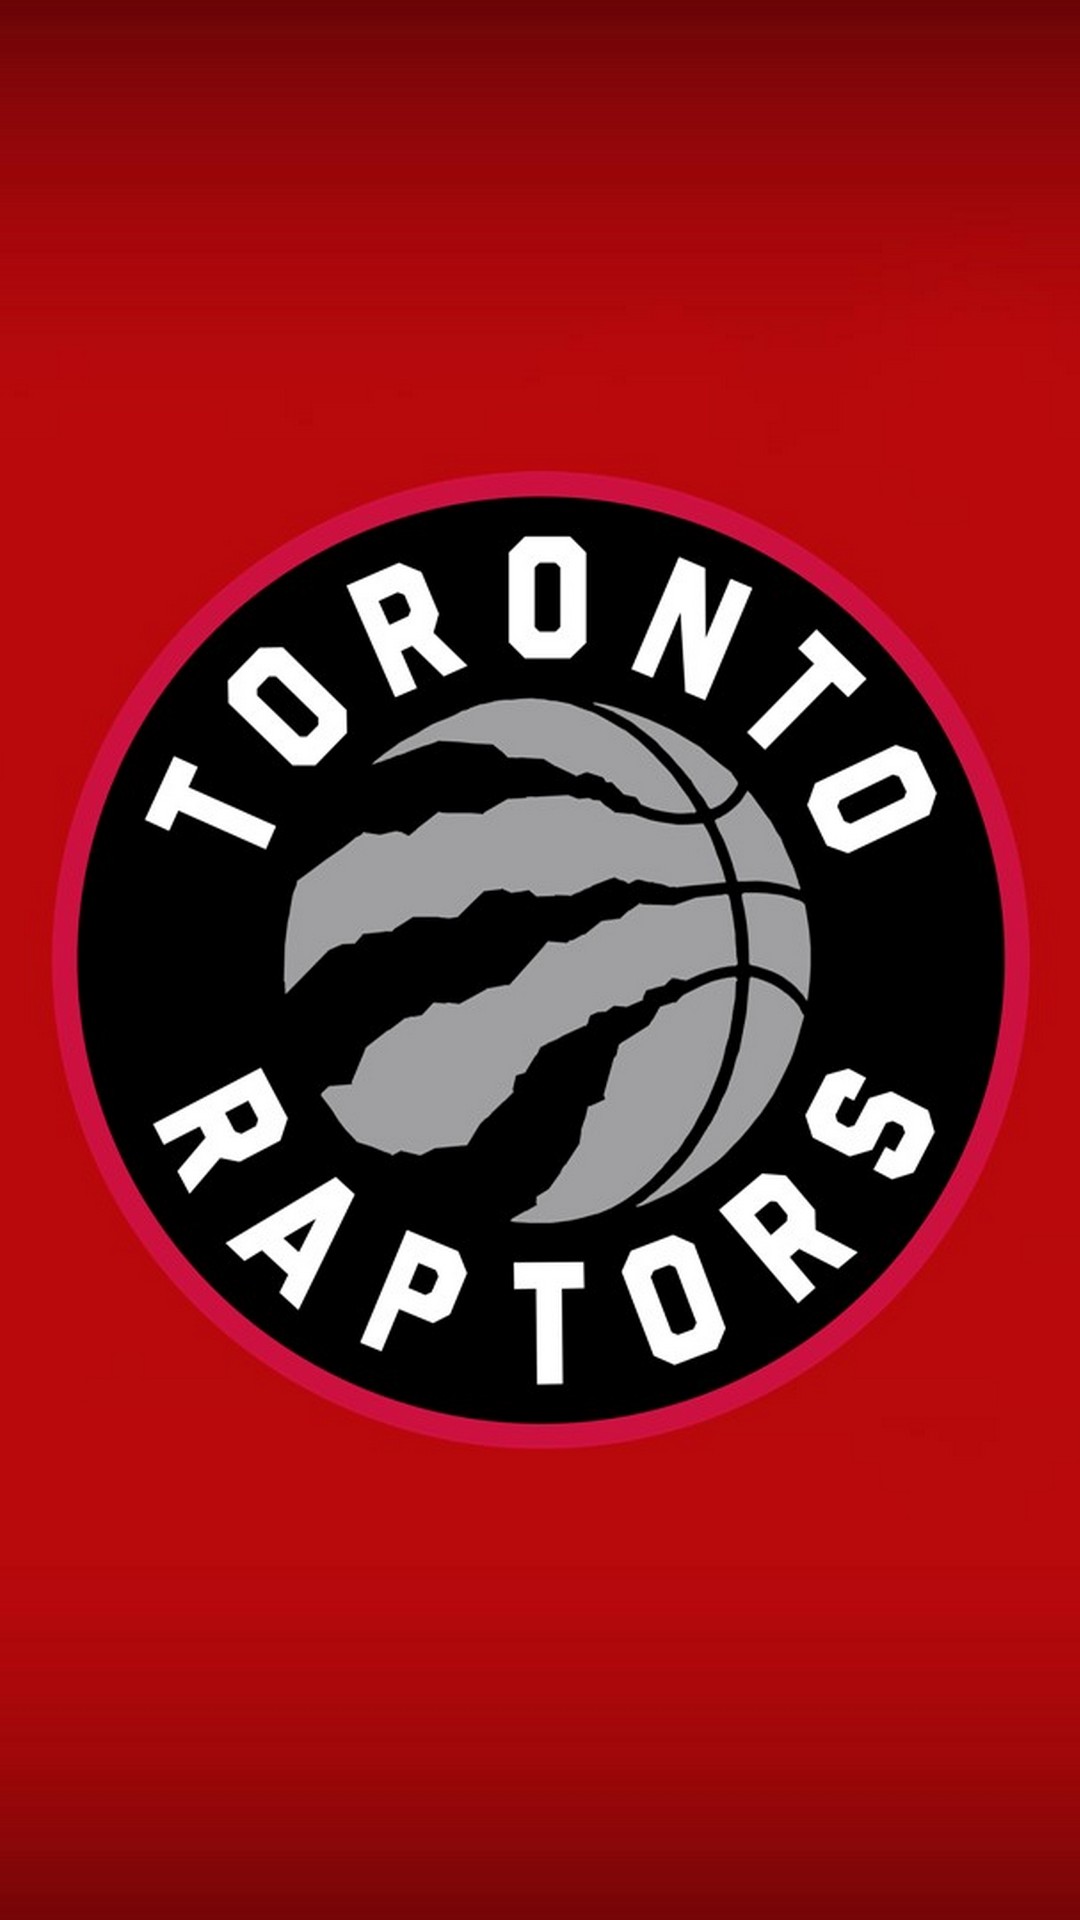 Wallpaper Toronto Raptors Android with image resolution 1080x1920 pixel. You can make this wallpaper for your Android backgrounds, Tablet, Smartphones Screensavers and Mobile Phone Lock Screen